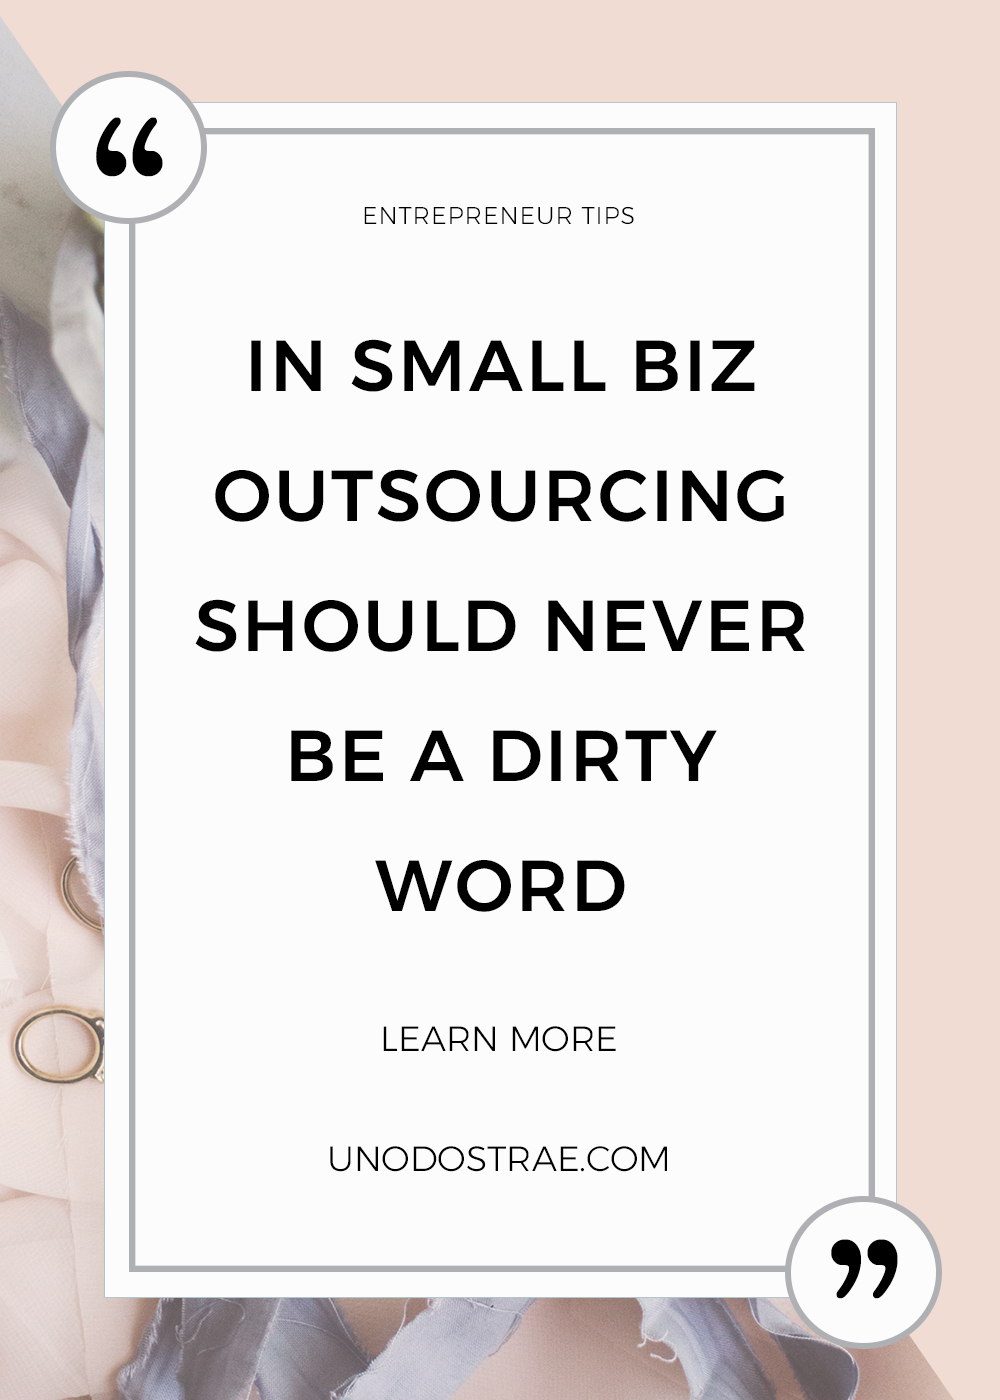 Small biz quotes for every entrepreneur- Outsourcing doesn't have to be a taboo topic